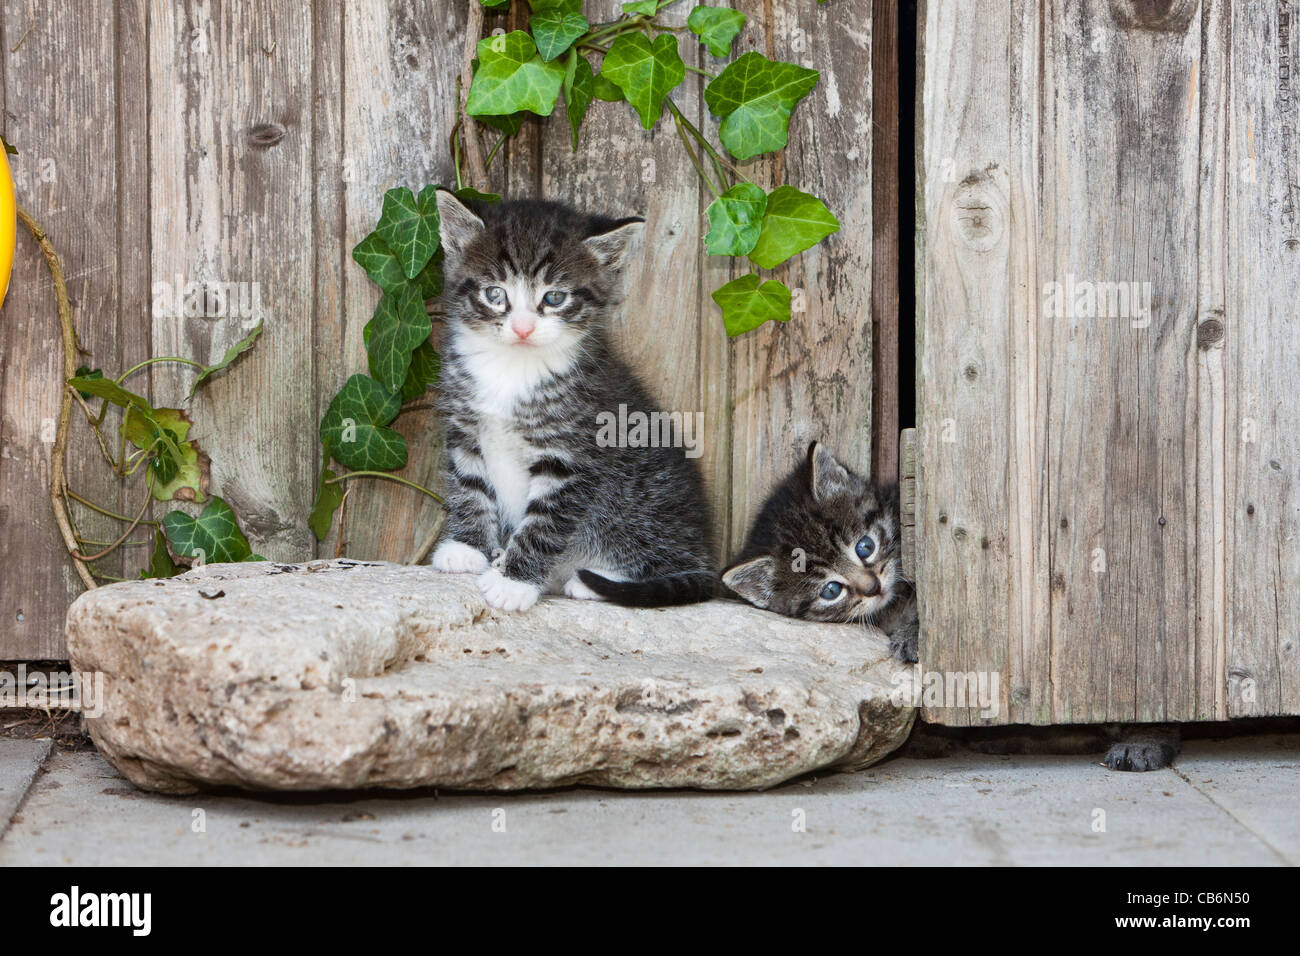 Kittens, two playing inside garden shed door, Lower Saxony, Germany Stock Photo